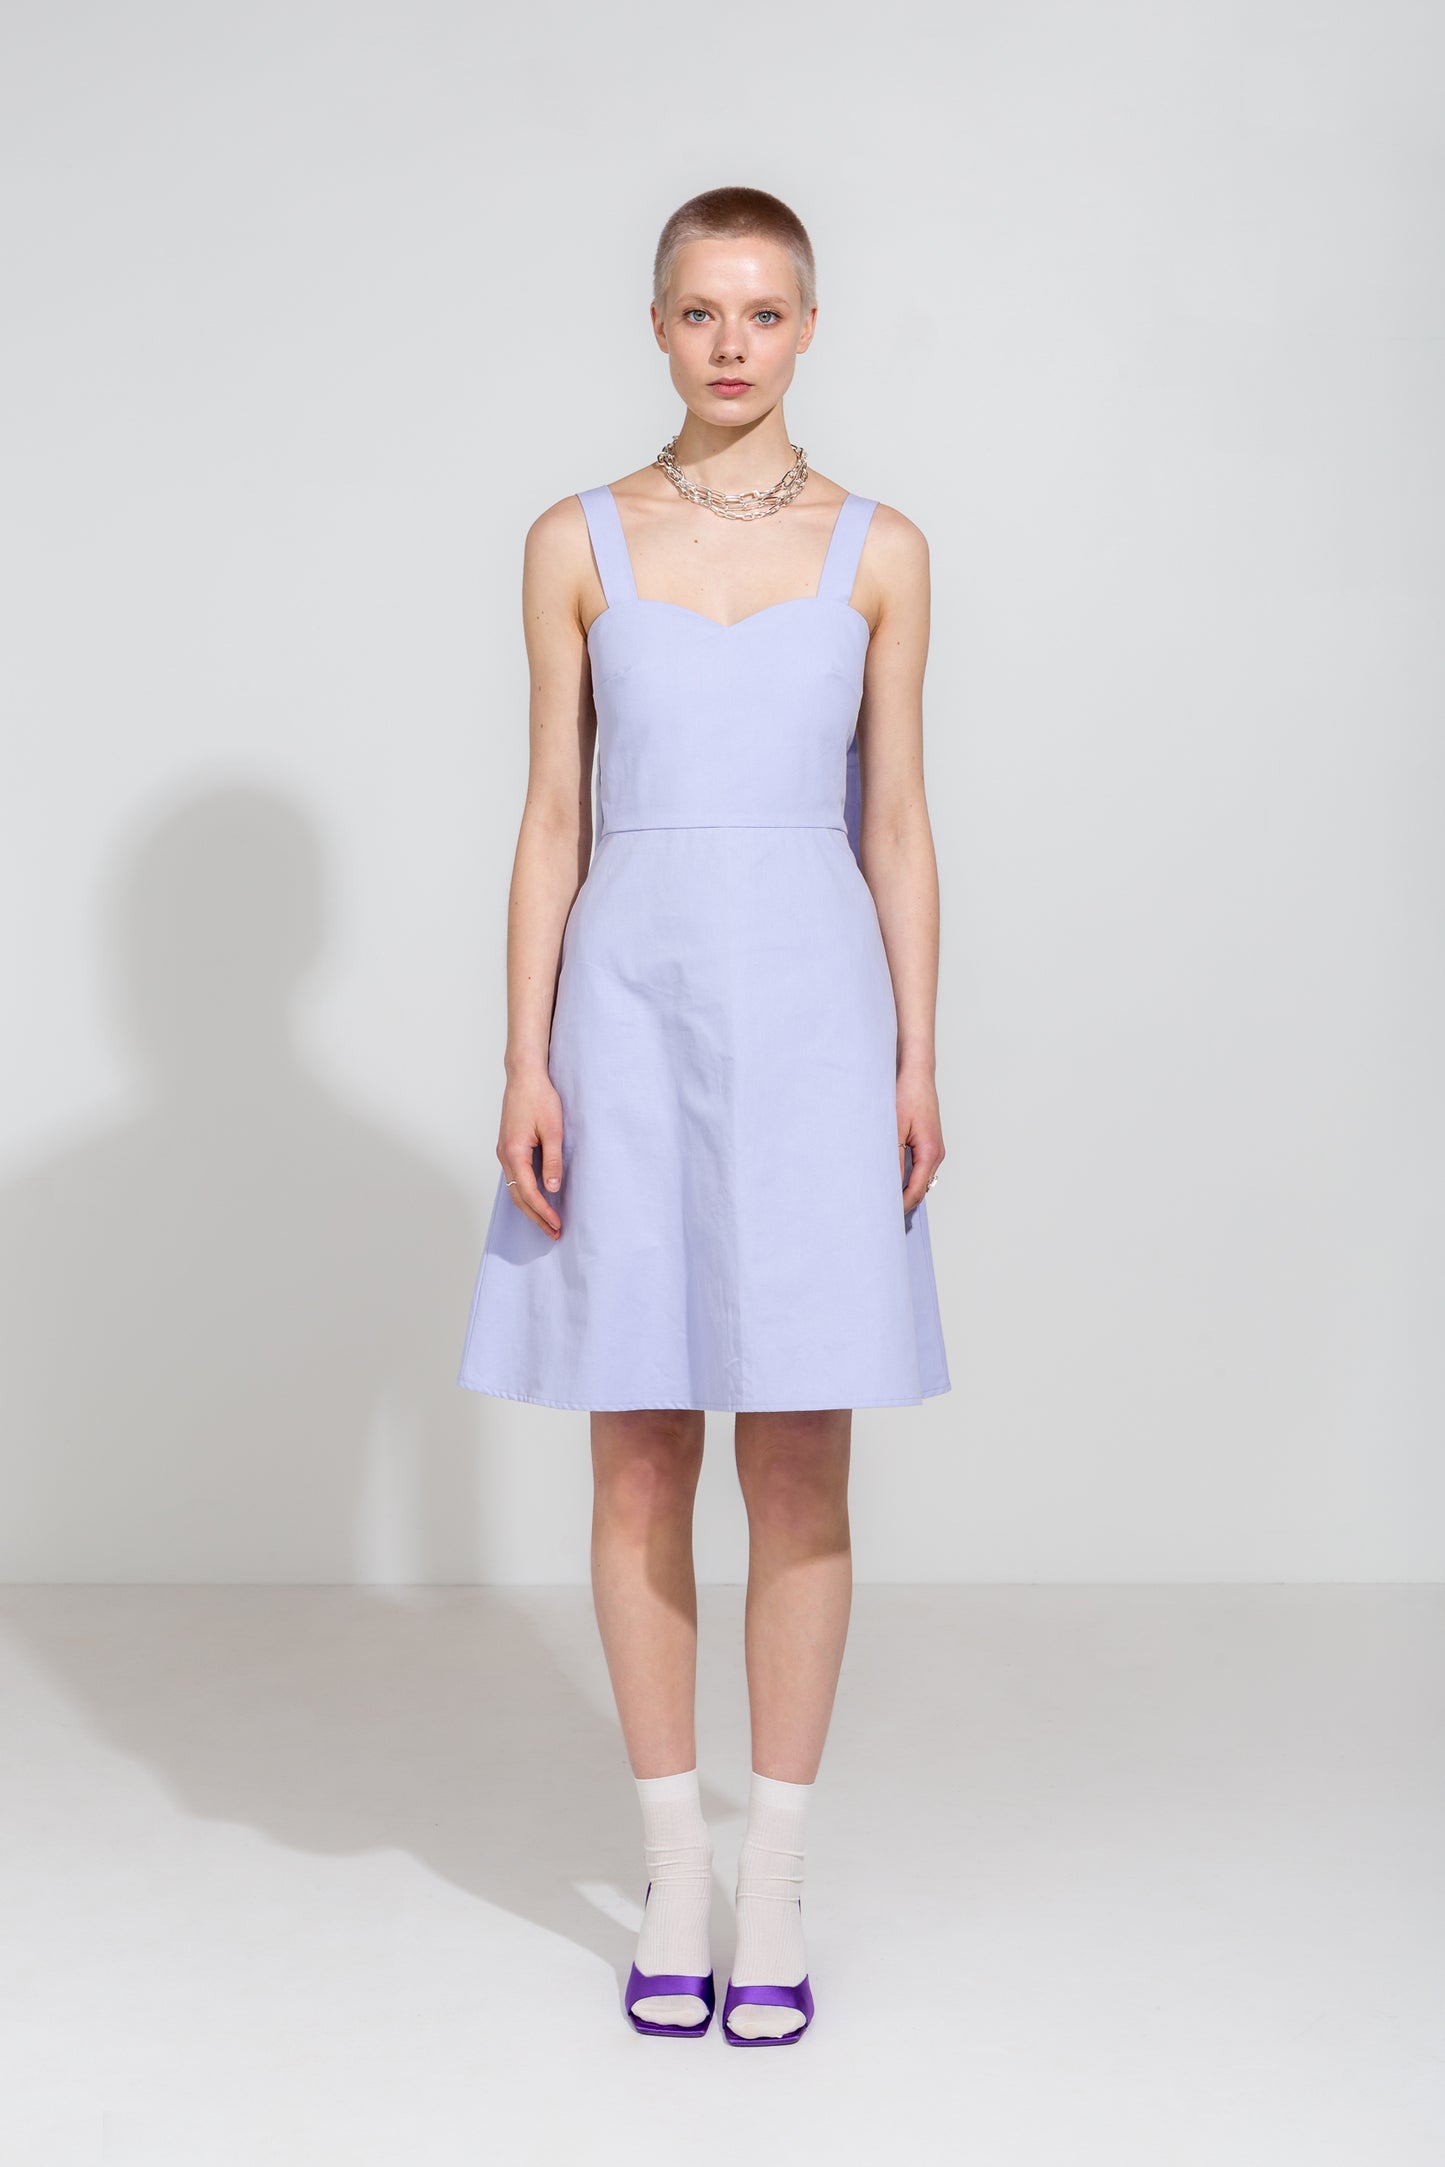 Icy lilac strapless dress in organic cotton